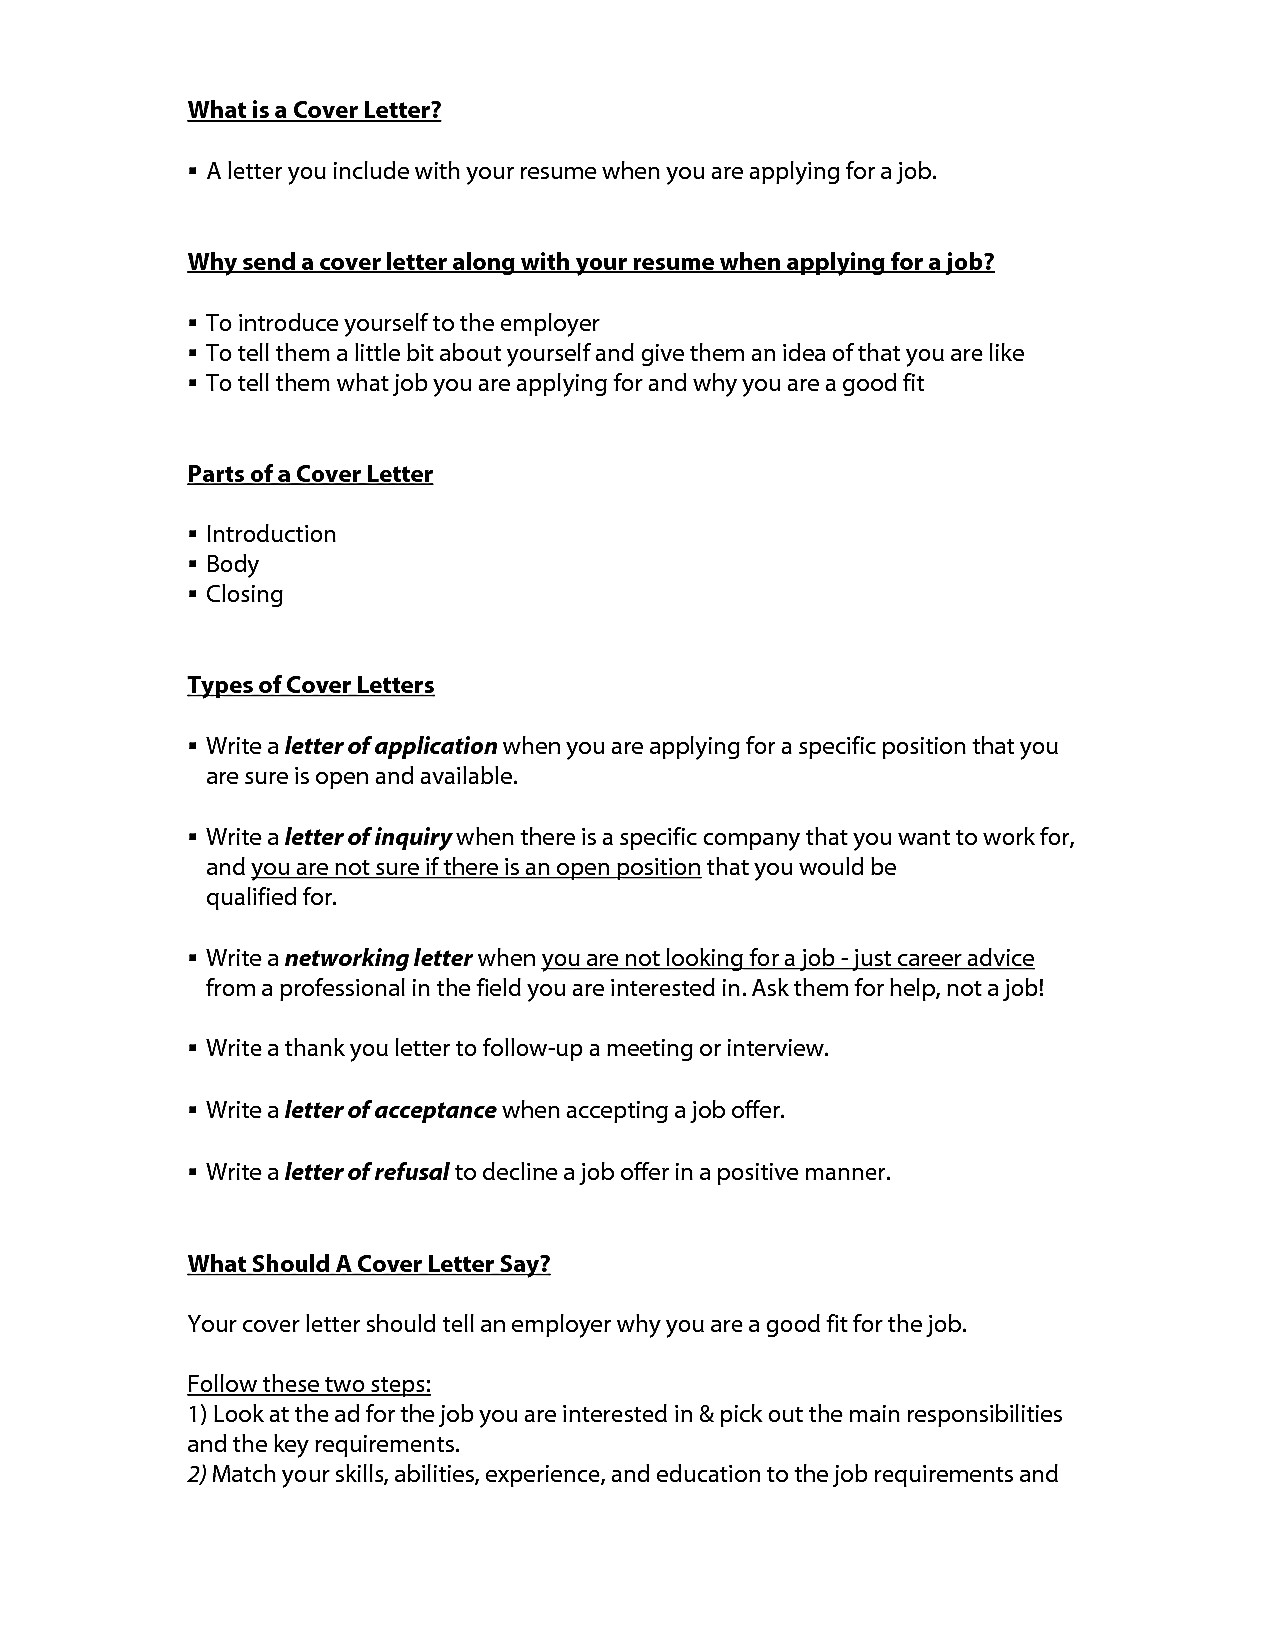 what should a cover letter for job application include